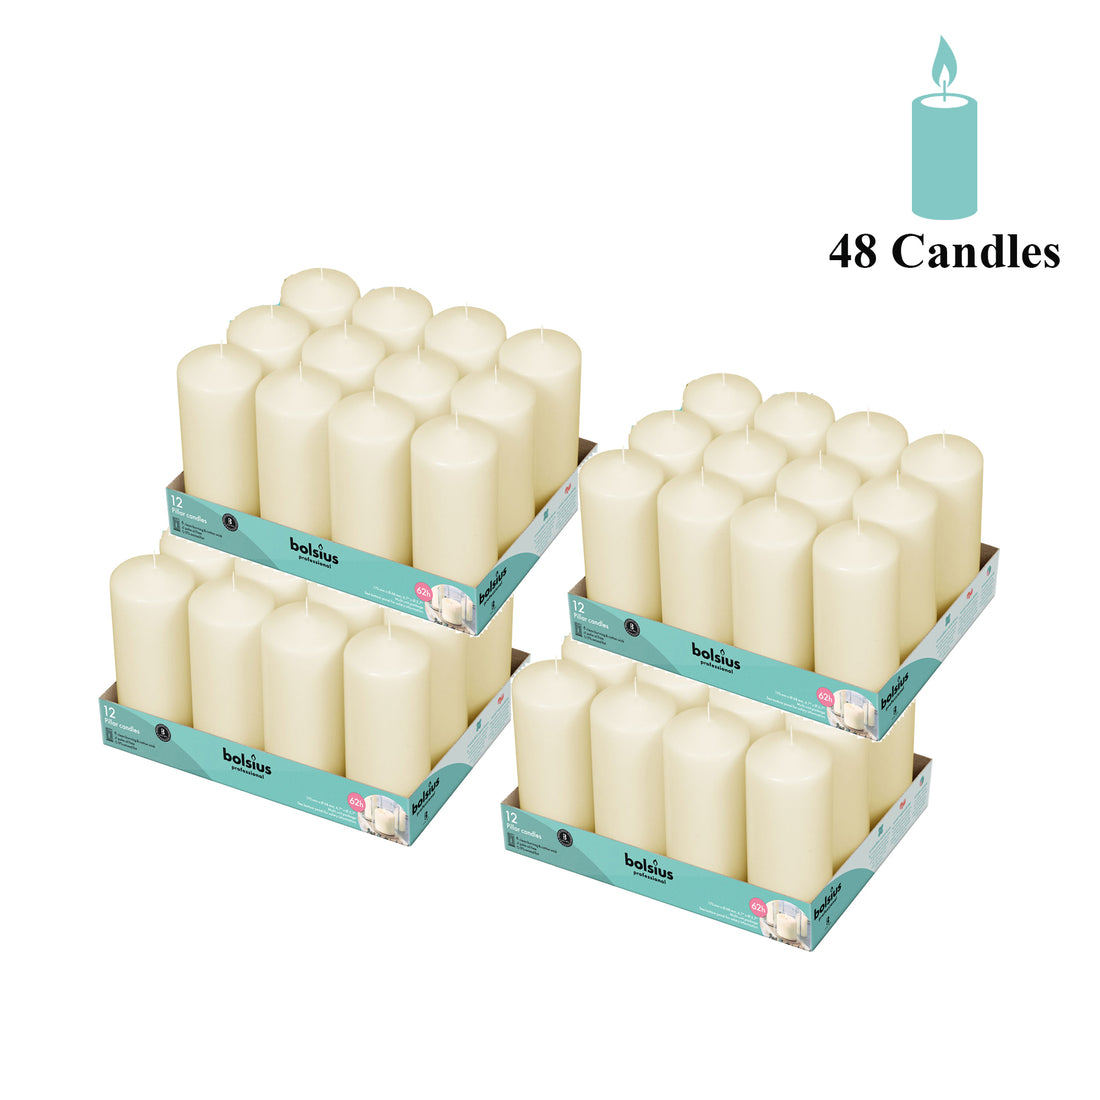 Bulk Pillar Candle 2.75" Inch Wide Collection